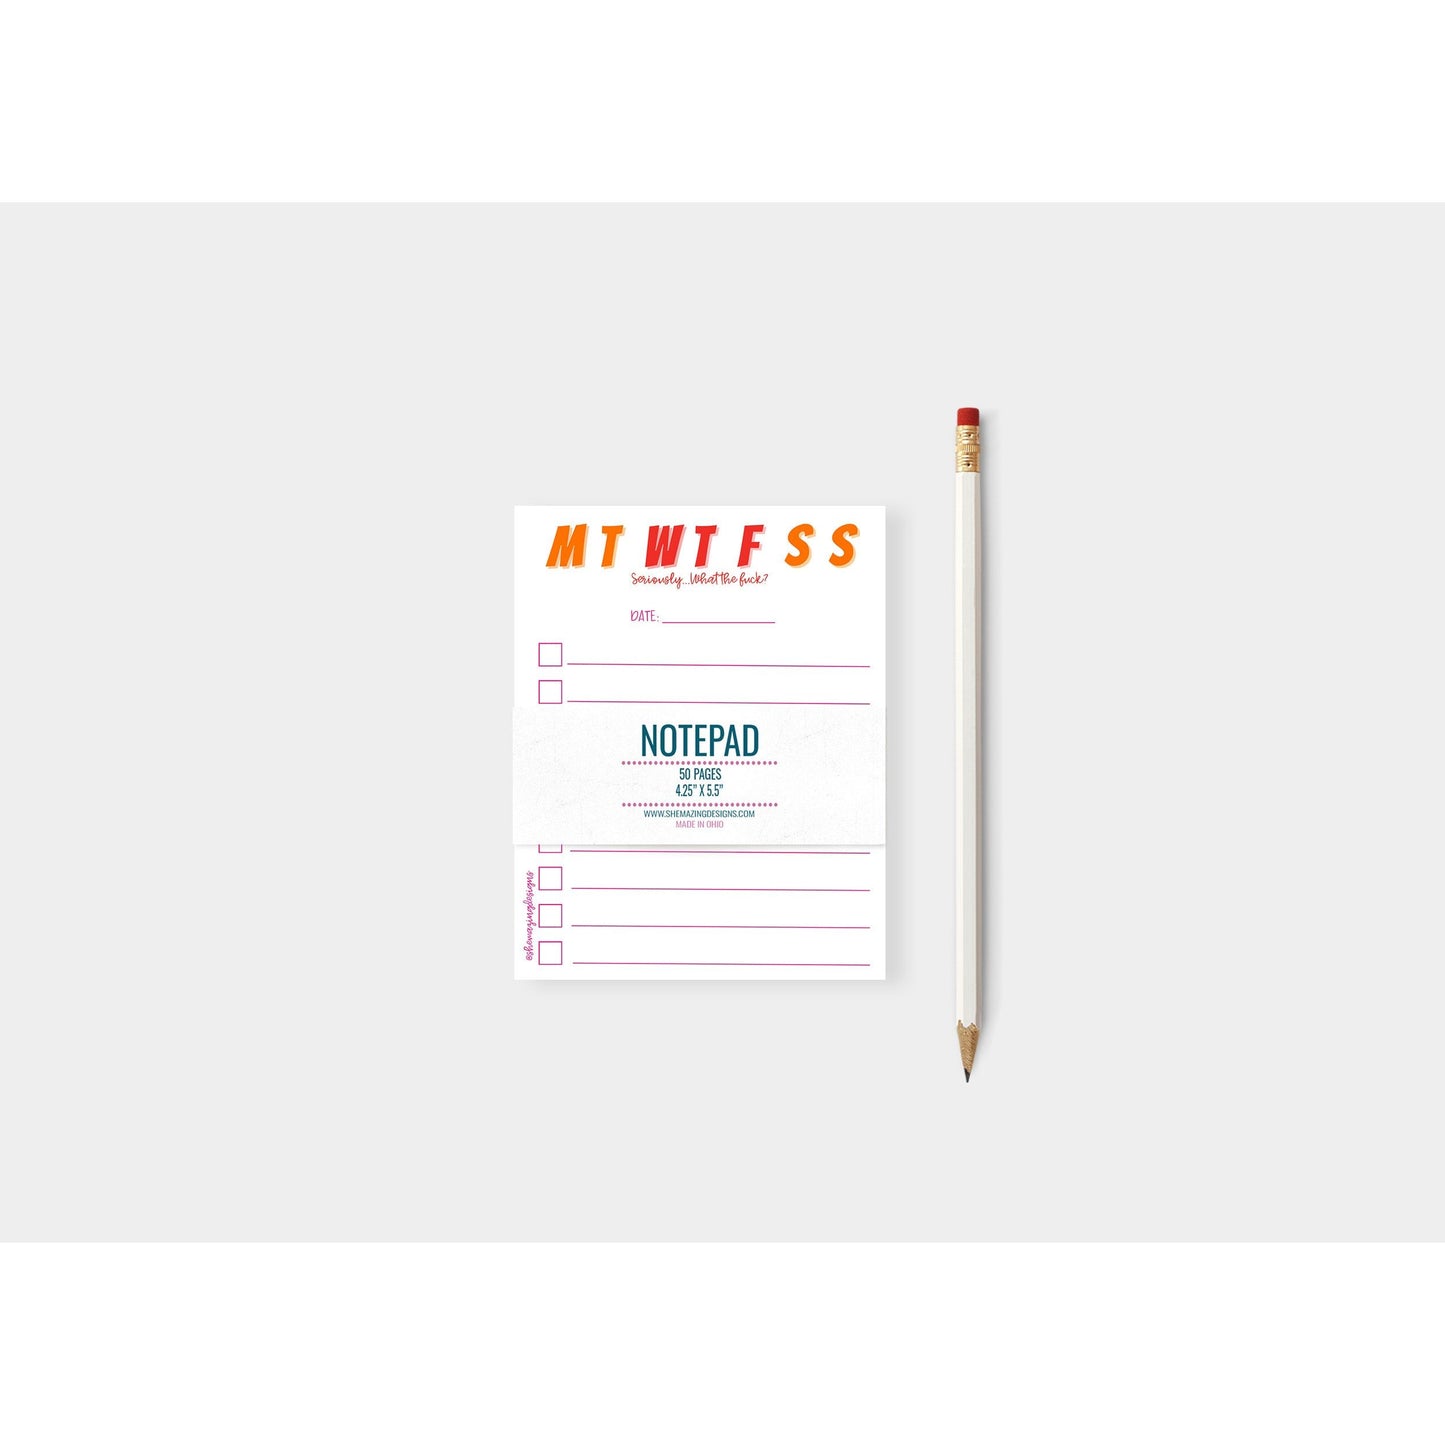 WTF-Days of the Week Notepad - 4.25" x 5.5" (A2)